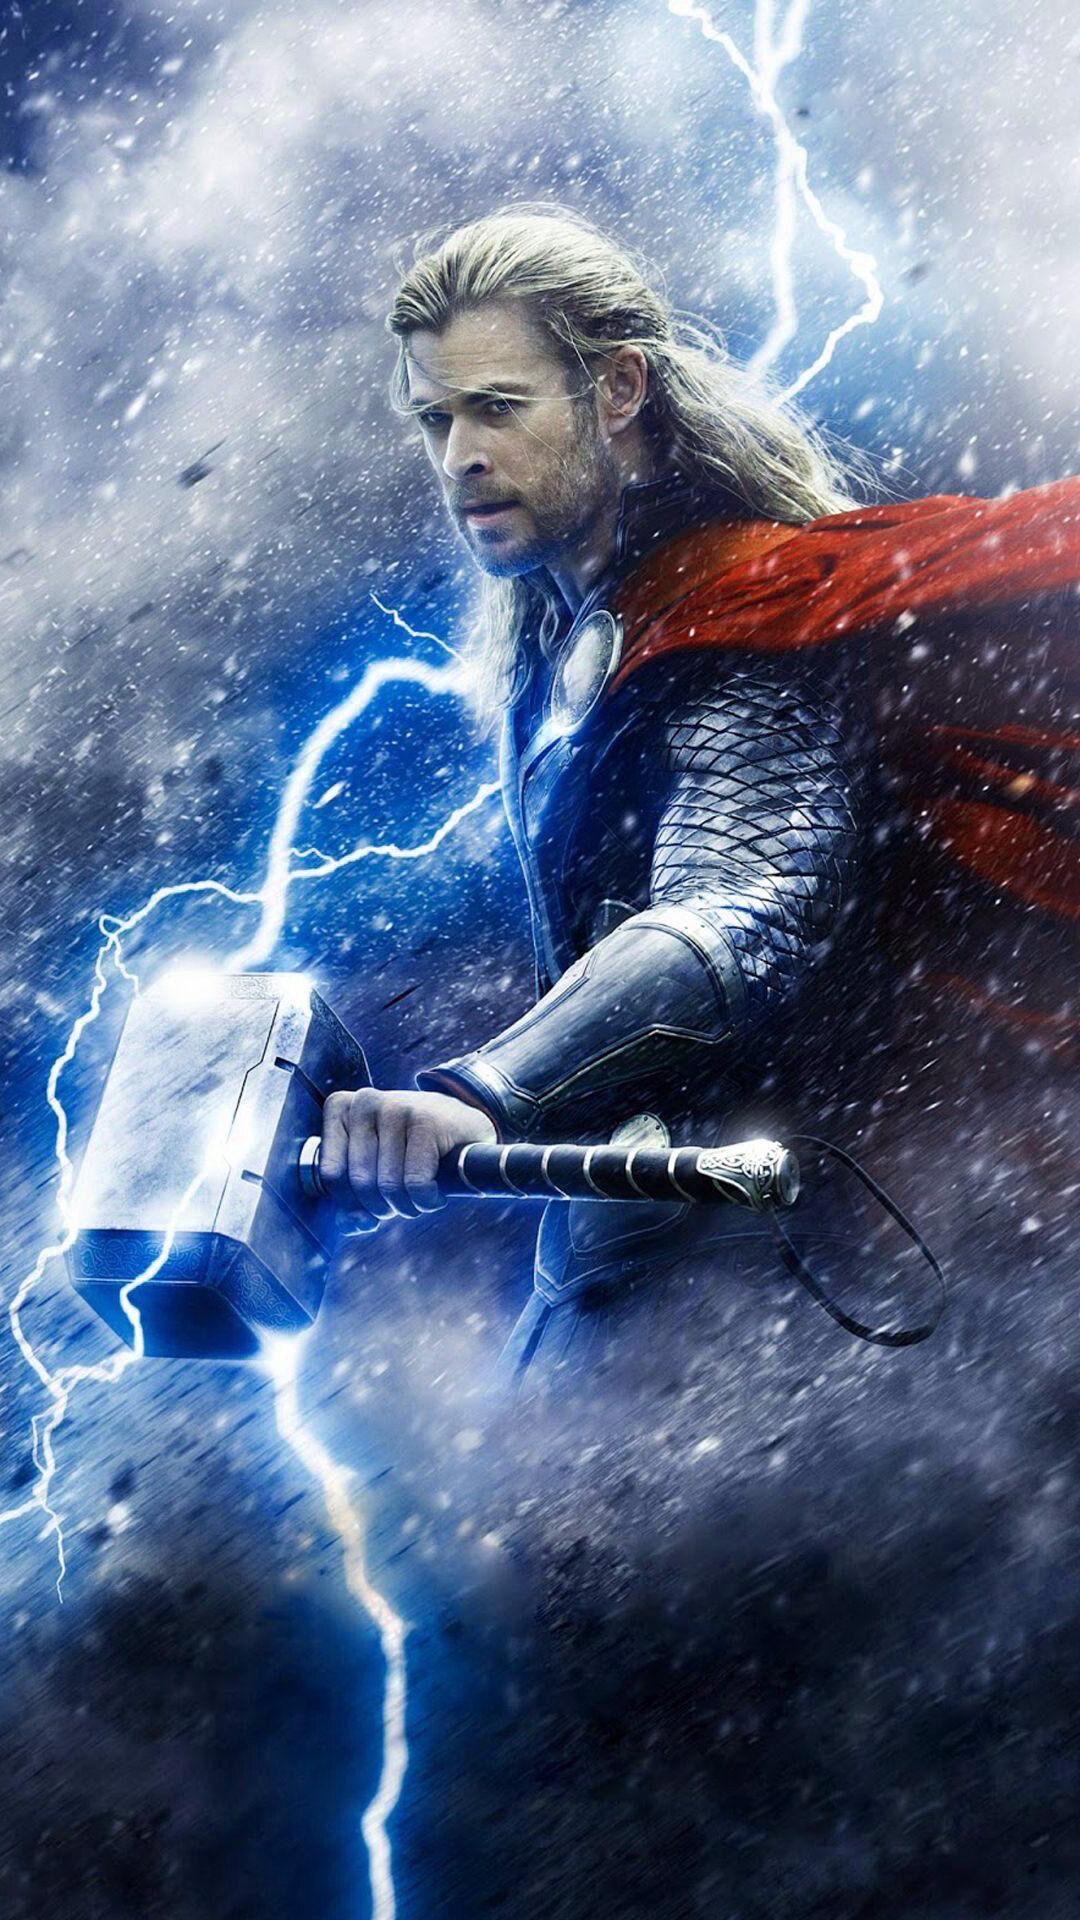 Avengers Thor Wallpapers - Top Free Avengers Thor Backgrounds ...